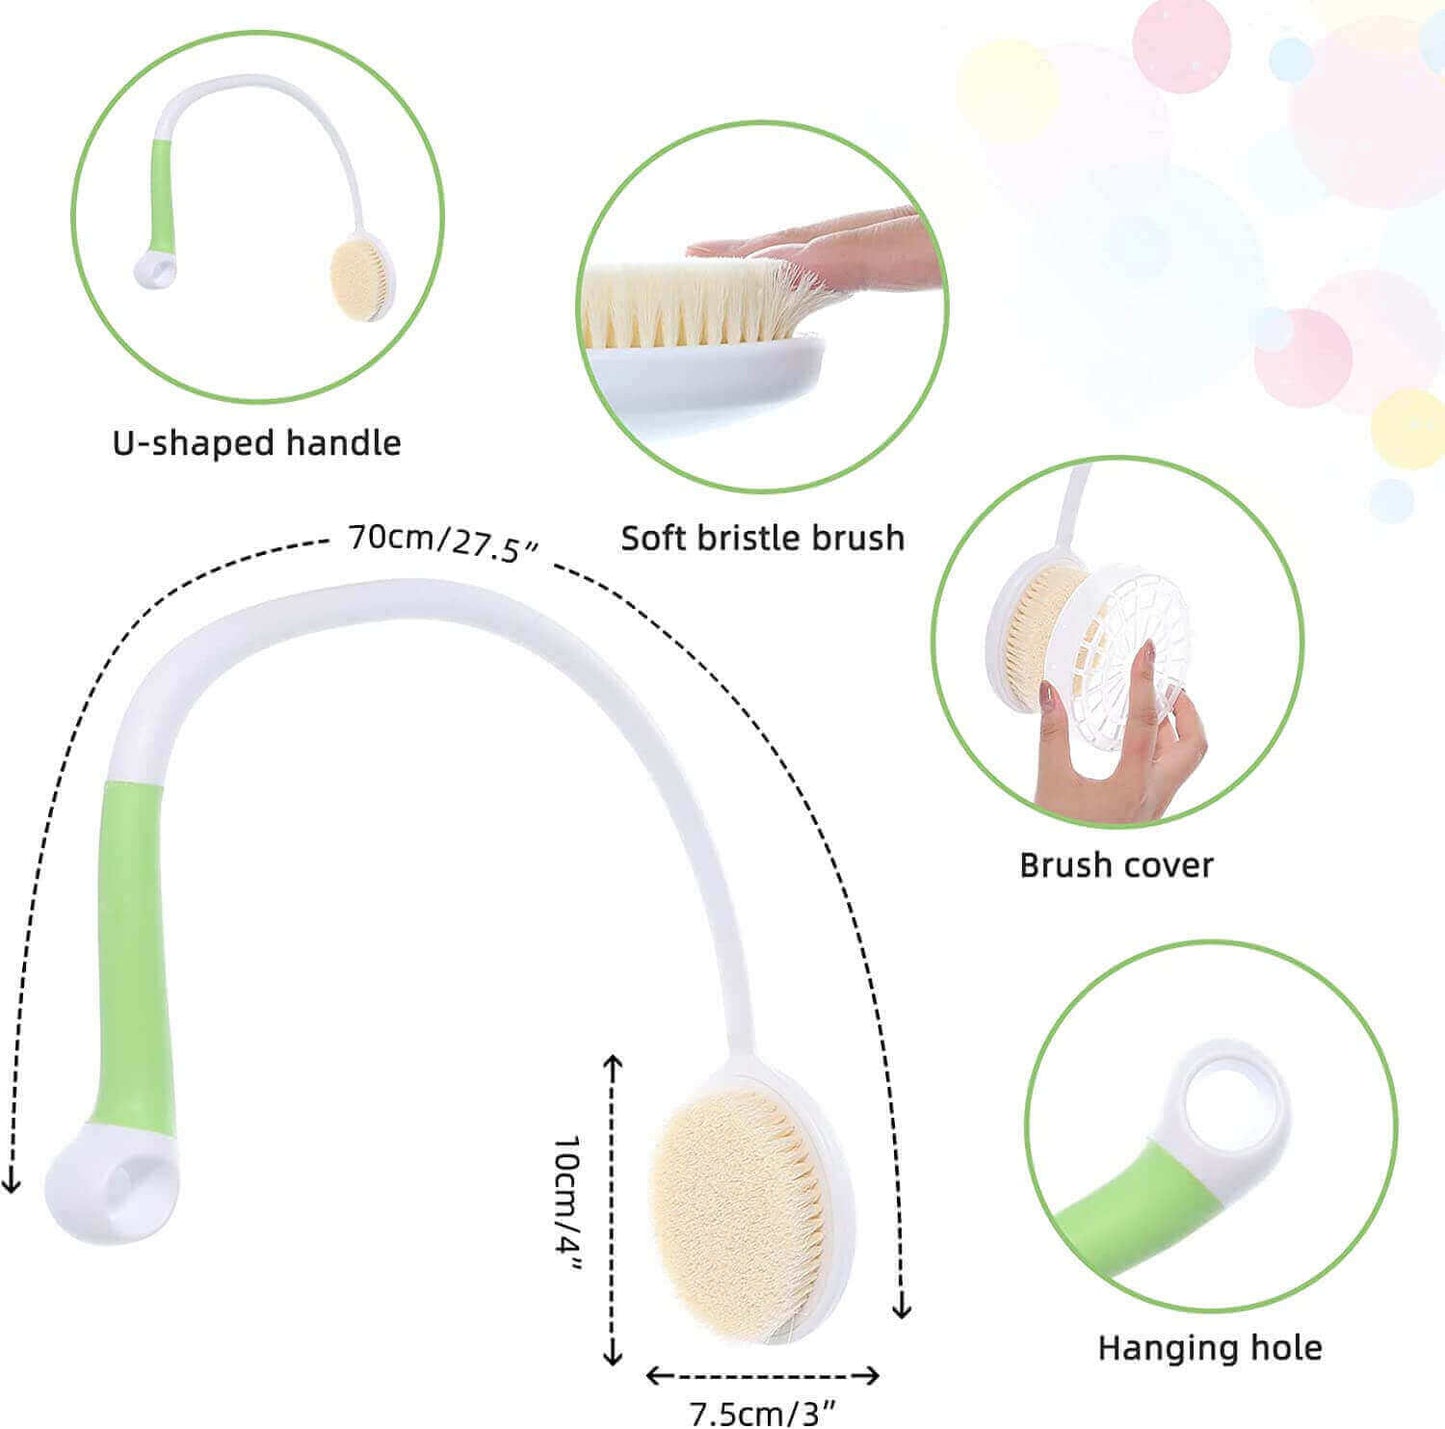 Fanwer Long-handle Curved Bath Brush with Silicone Scrubber, item details